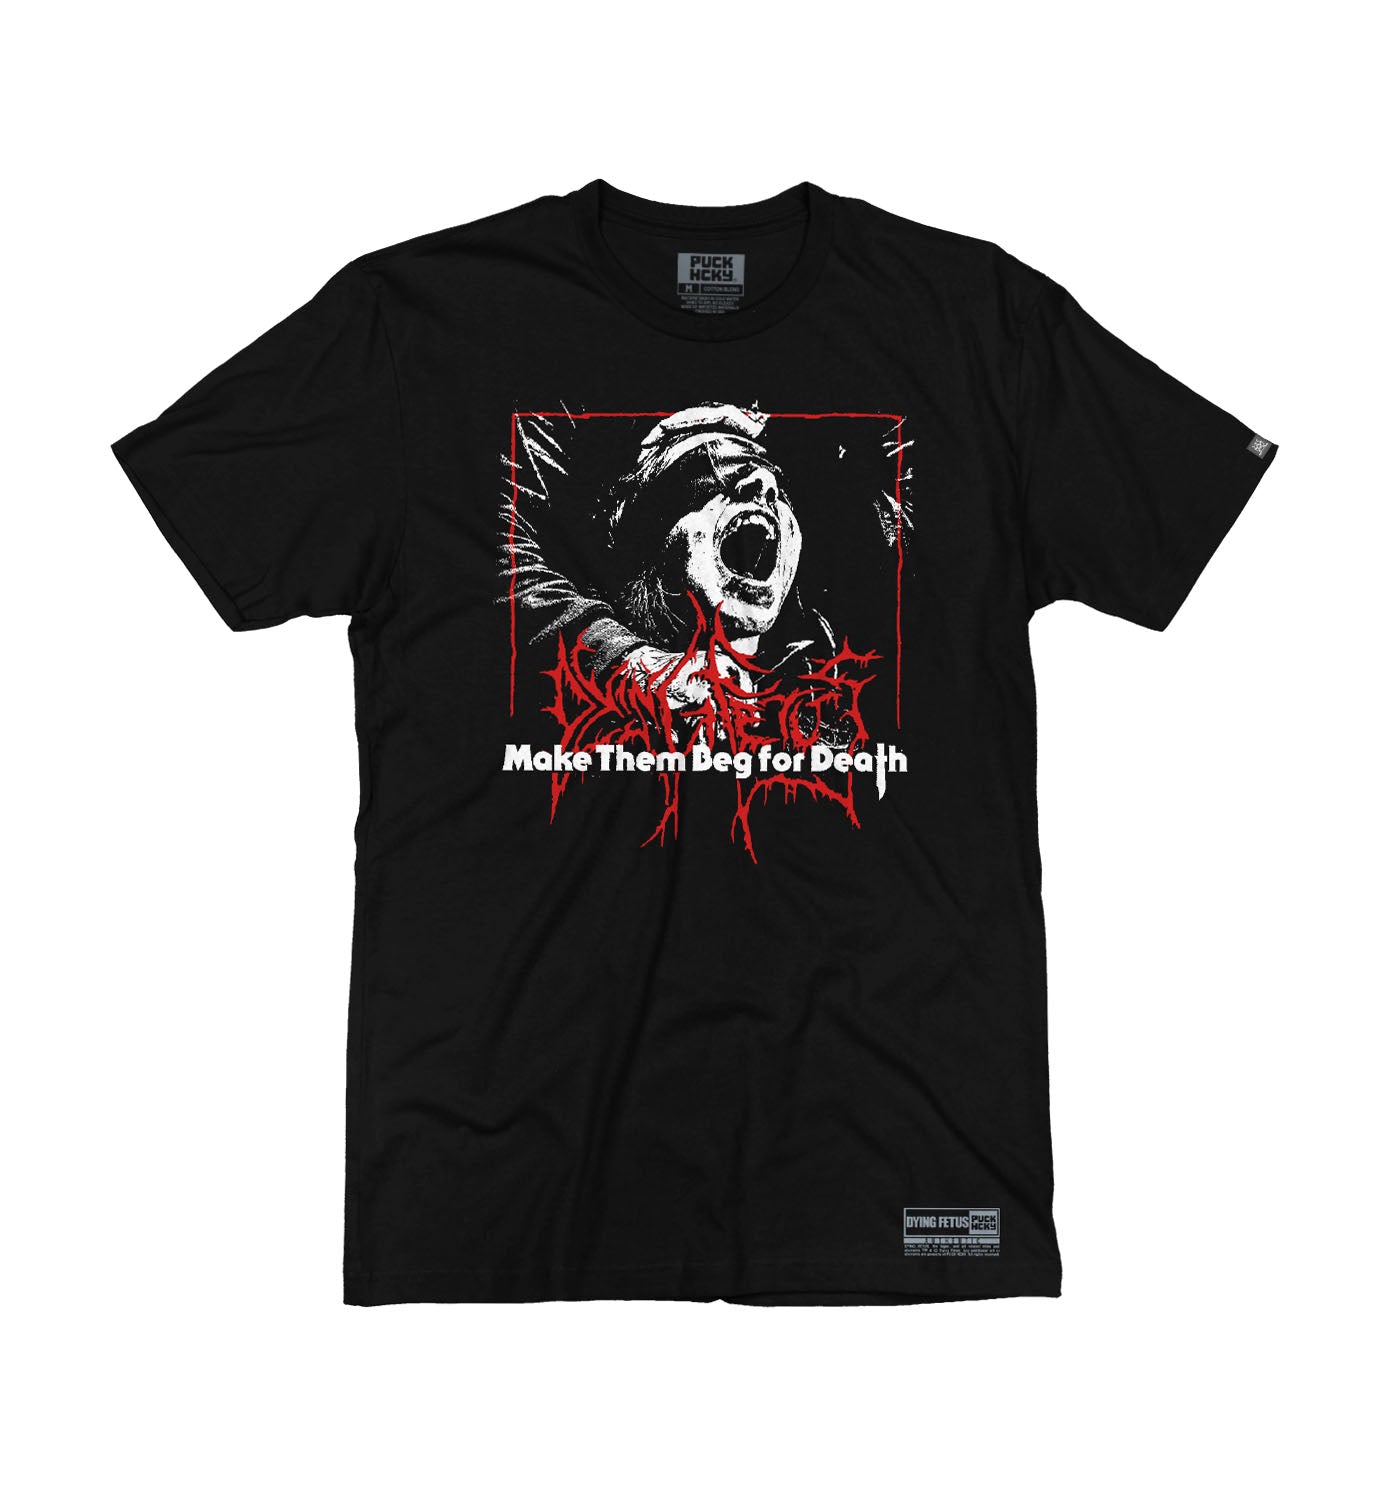 DYING FETUS 'MAKE THEM BEG' short sleeve hockey t-shirt in black front view